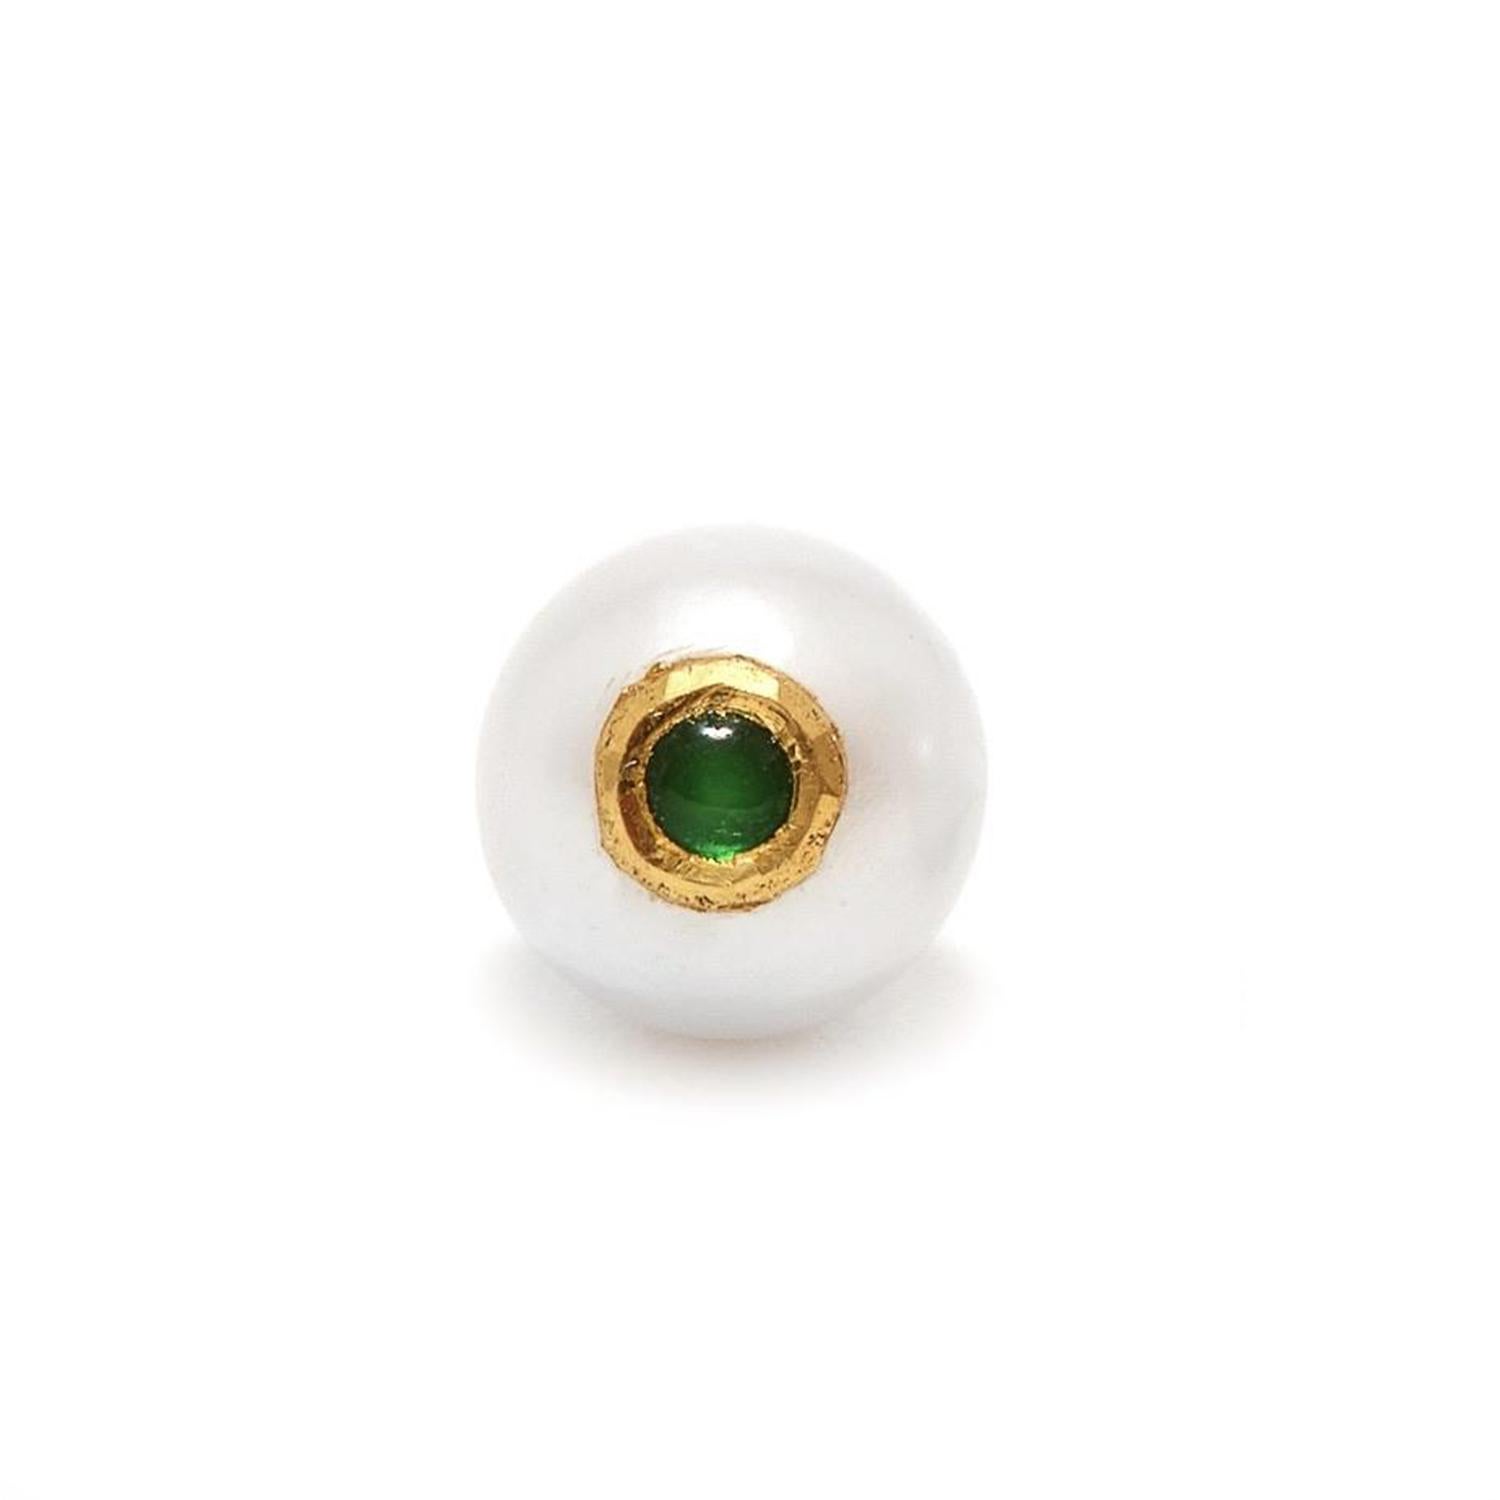 Pearl Stud Earrings set with Emeralds in a 22 Karat Gold Kundan bezel... a modern and unique interpretation on the classic Pearl Stud Earrings and perfectly on trend for any occasion.

- White South Sea Pearls approx 11 mm in diameter.
- Emeralds